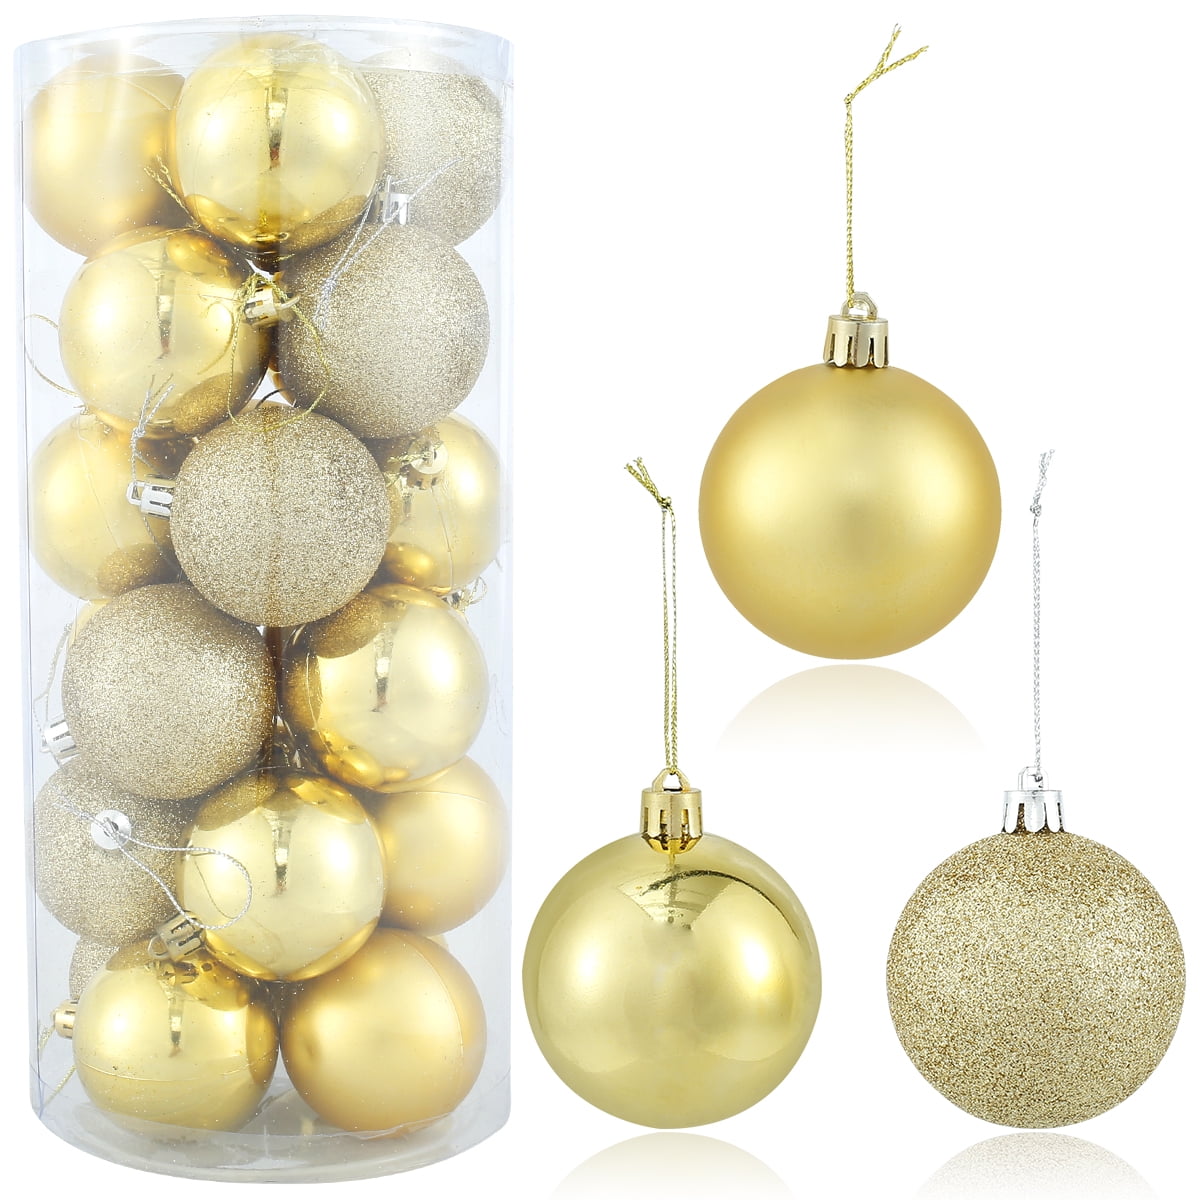 Christmas Ball Ornaments 3.9 Shatterproof Christmas Tree Decorations Set Large Champagne Christmas Ornaments Balls for Xmas Trees Wedding Party Home Decor 8 Pcs 4 Styles in 2 Sizes